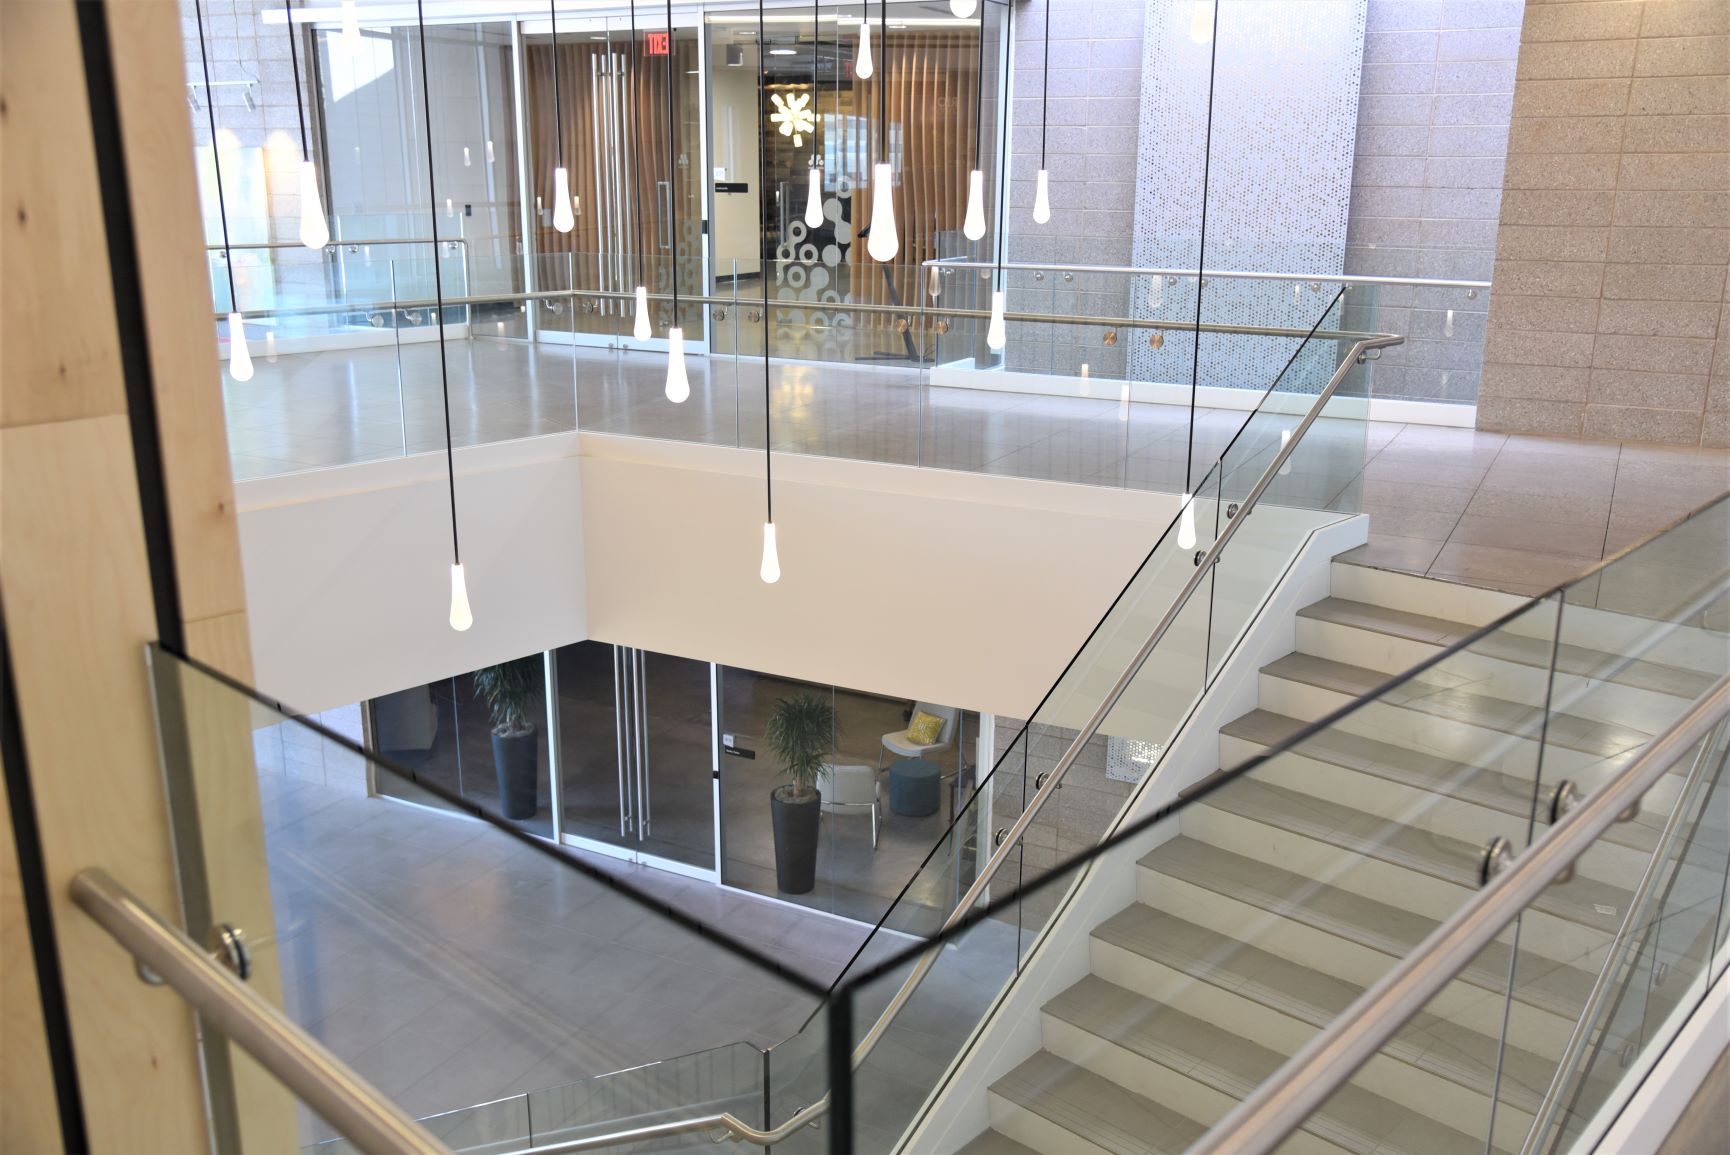 Scope: Stainless steel glass railings with painted steel base cladding.